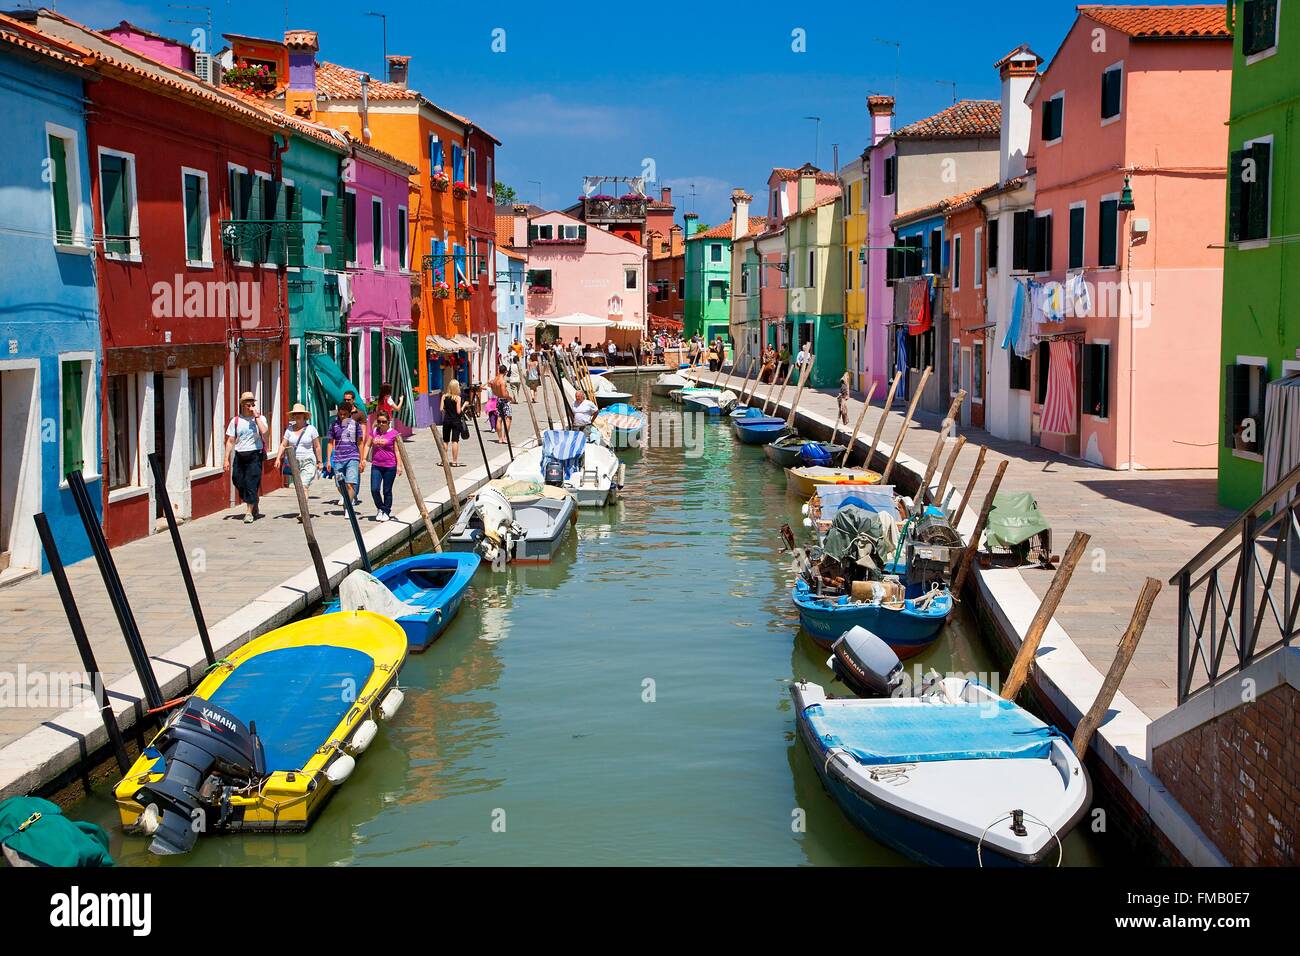 Italy, Veneto, Venice, Colorful Boats and Homes Lining Canal in Burano Stock Photo